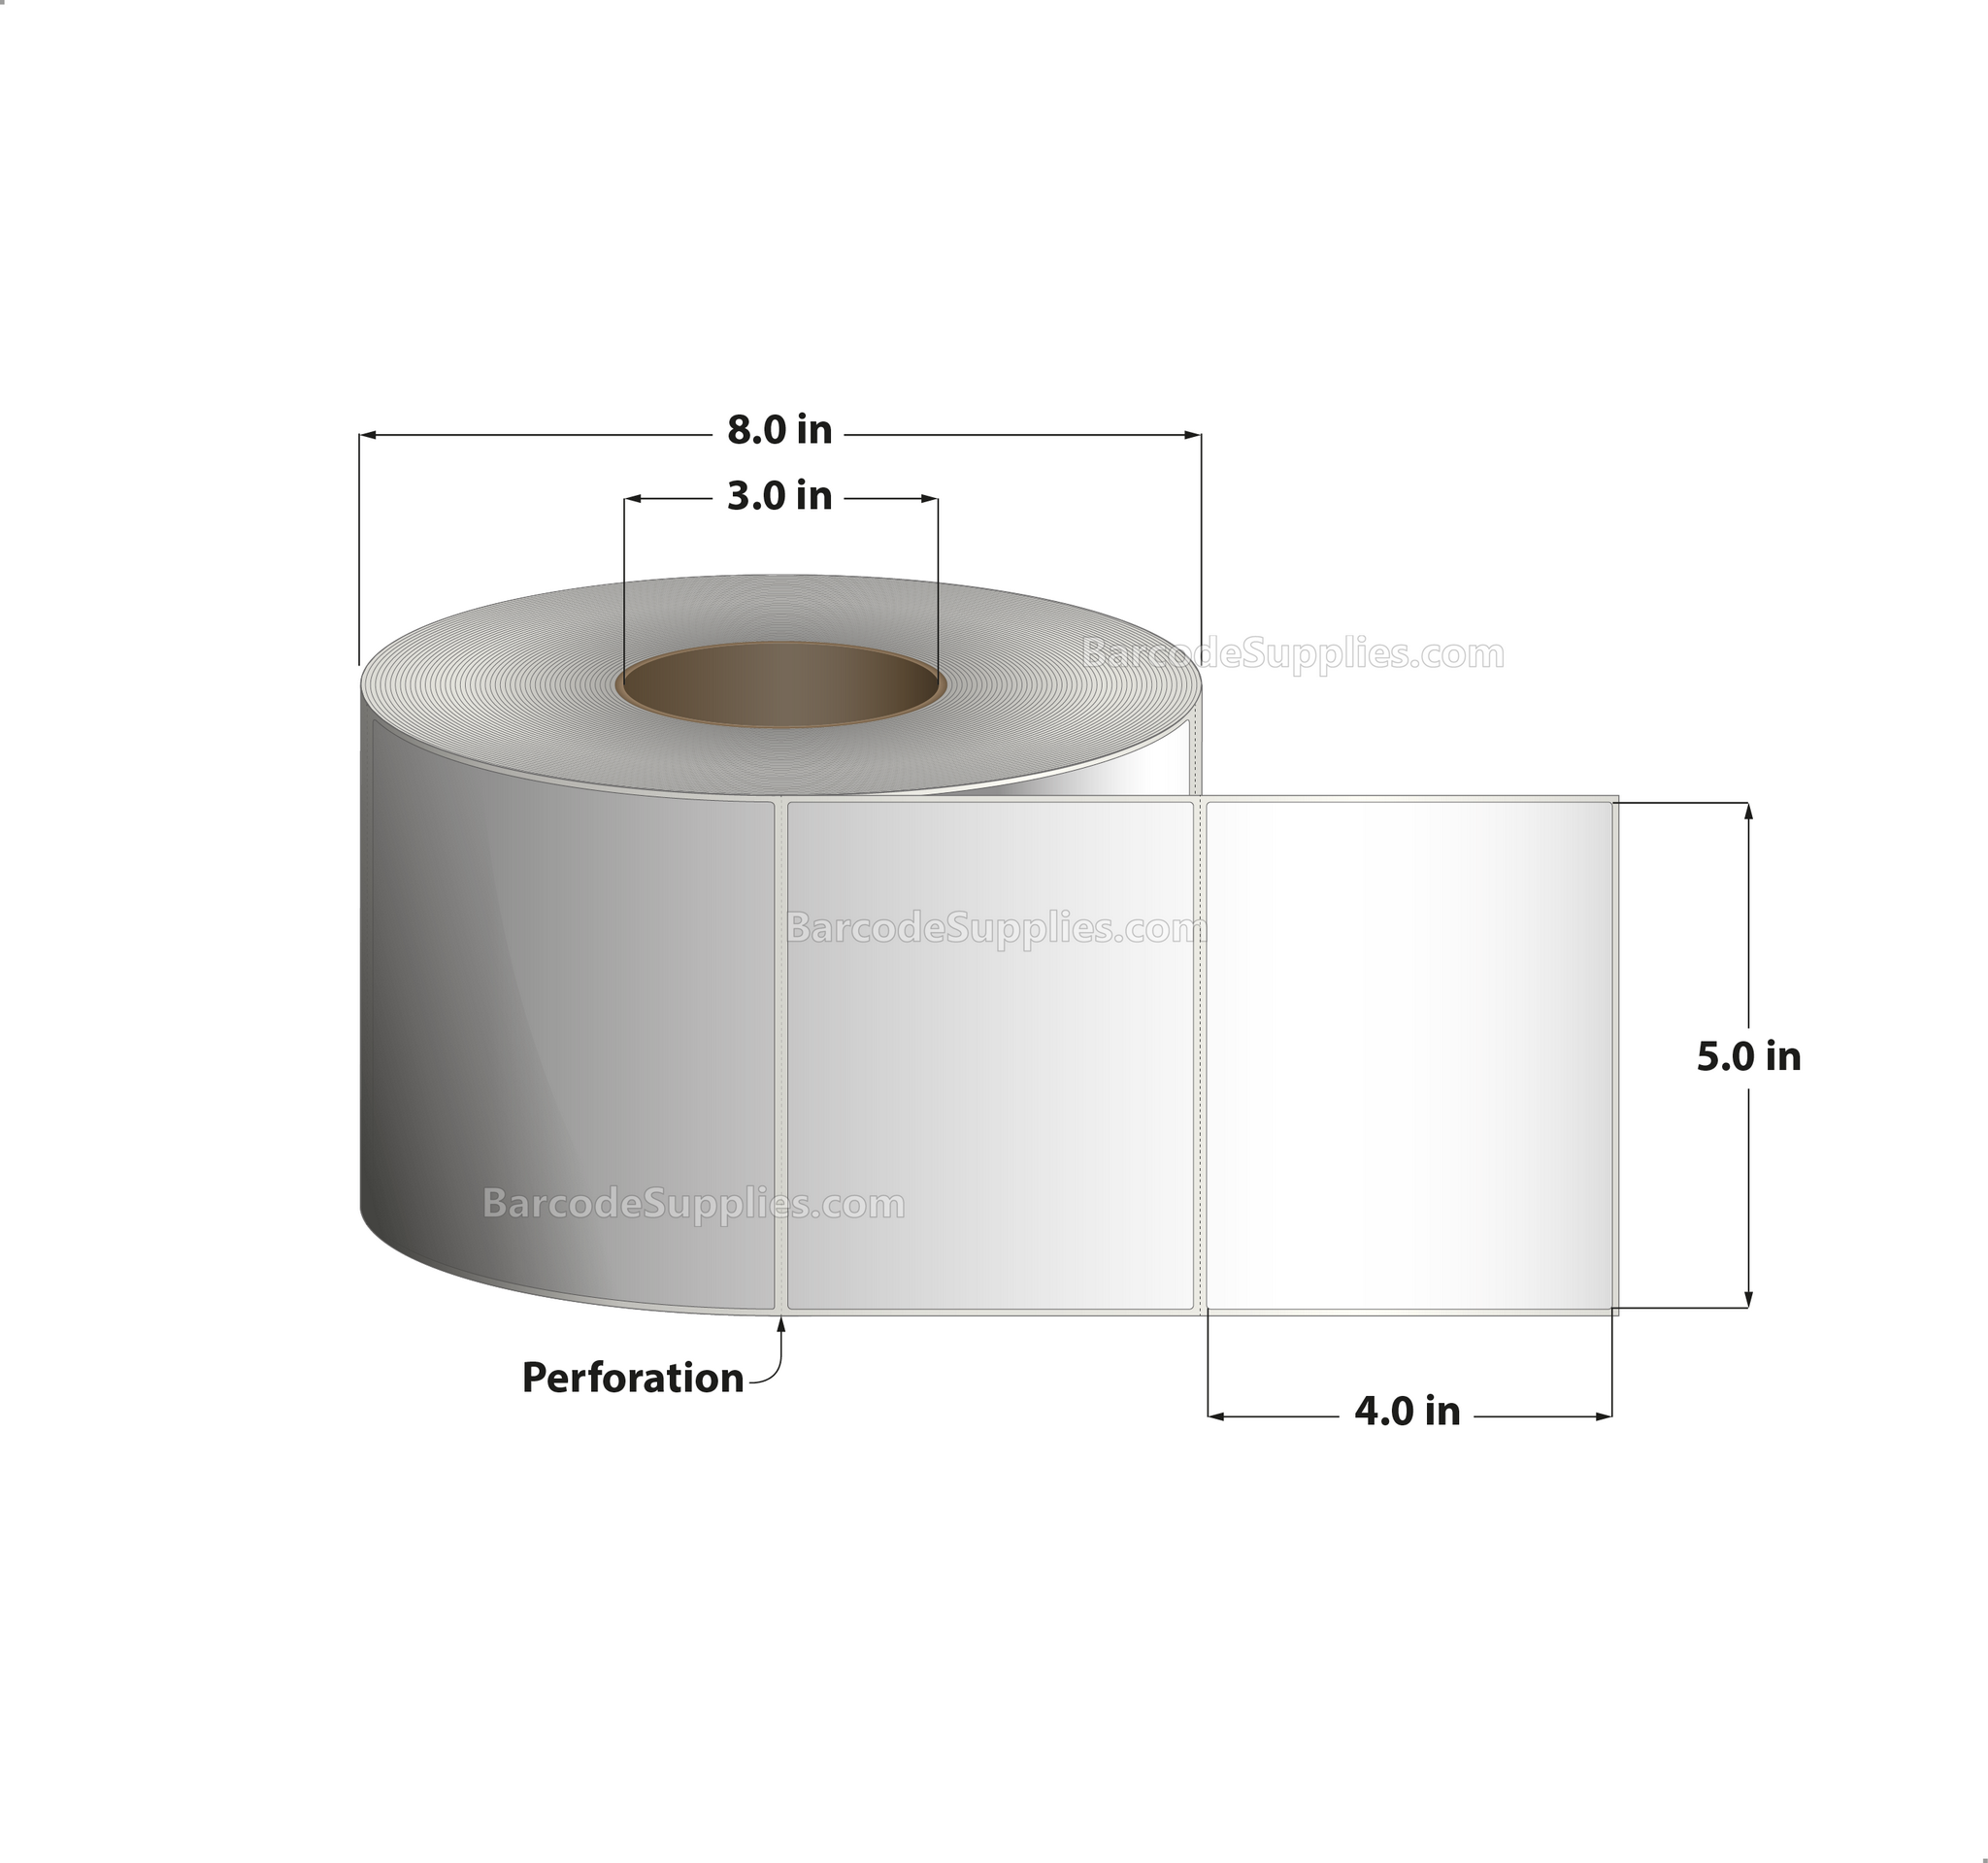 5 x 4 Thermal Transfer White Labels With Permanent Acrylic Adhesive - Perforated - 1500 Labels Per Roll - Carton Of 4 Rolls - 6000 Labels Total - MPN: TH54-1P